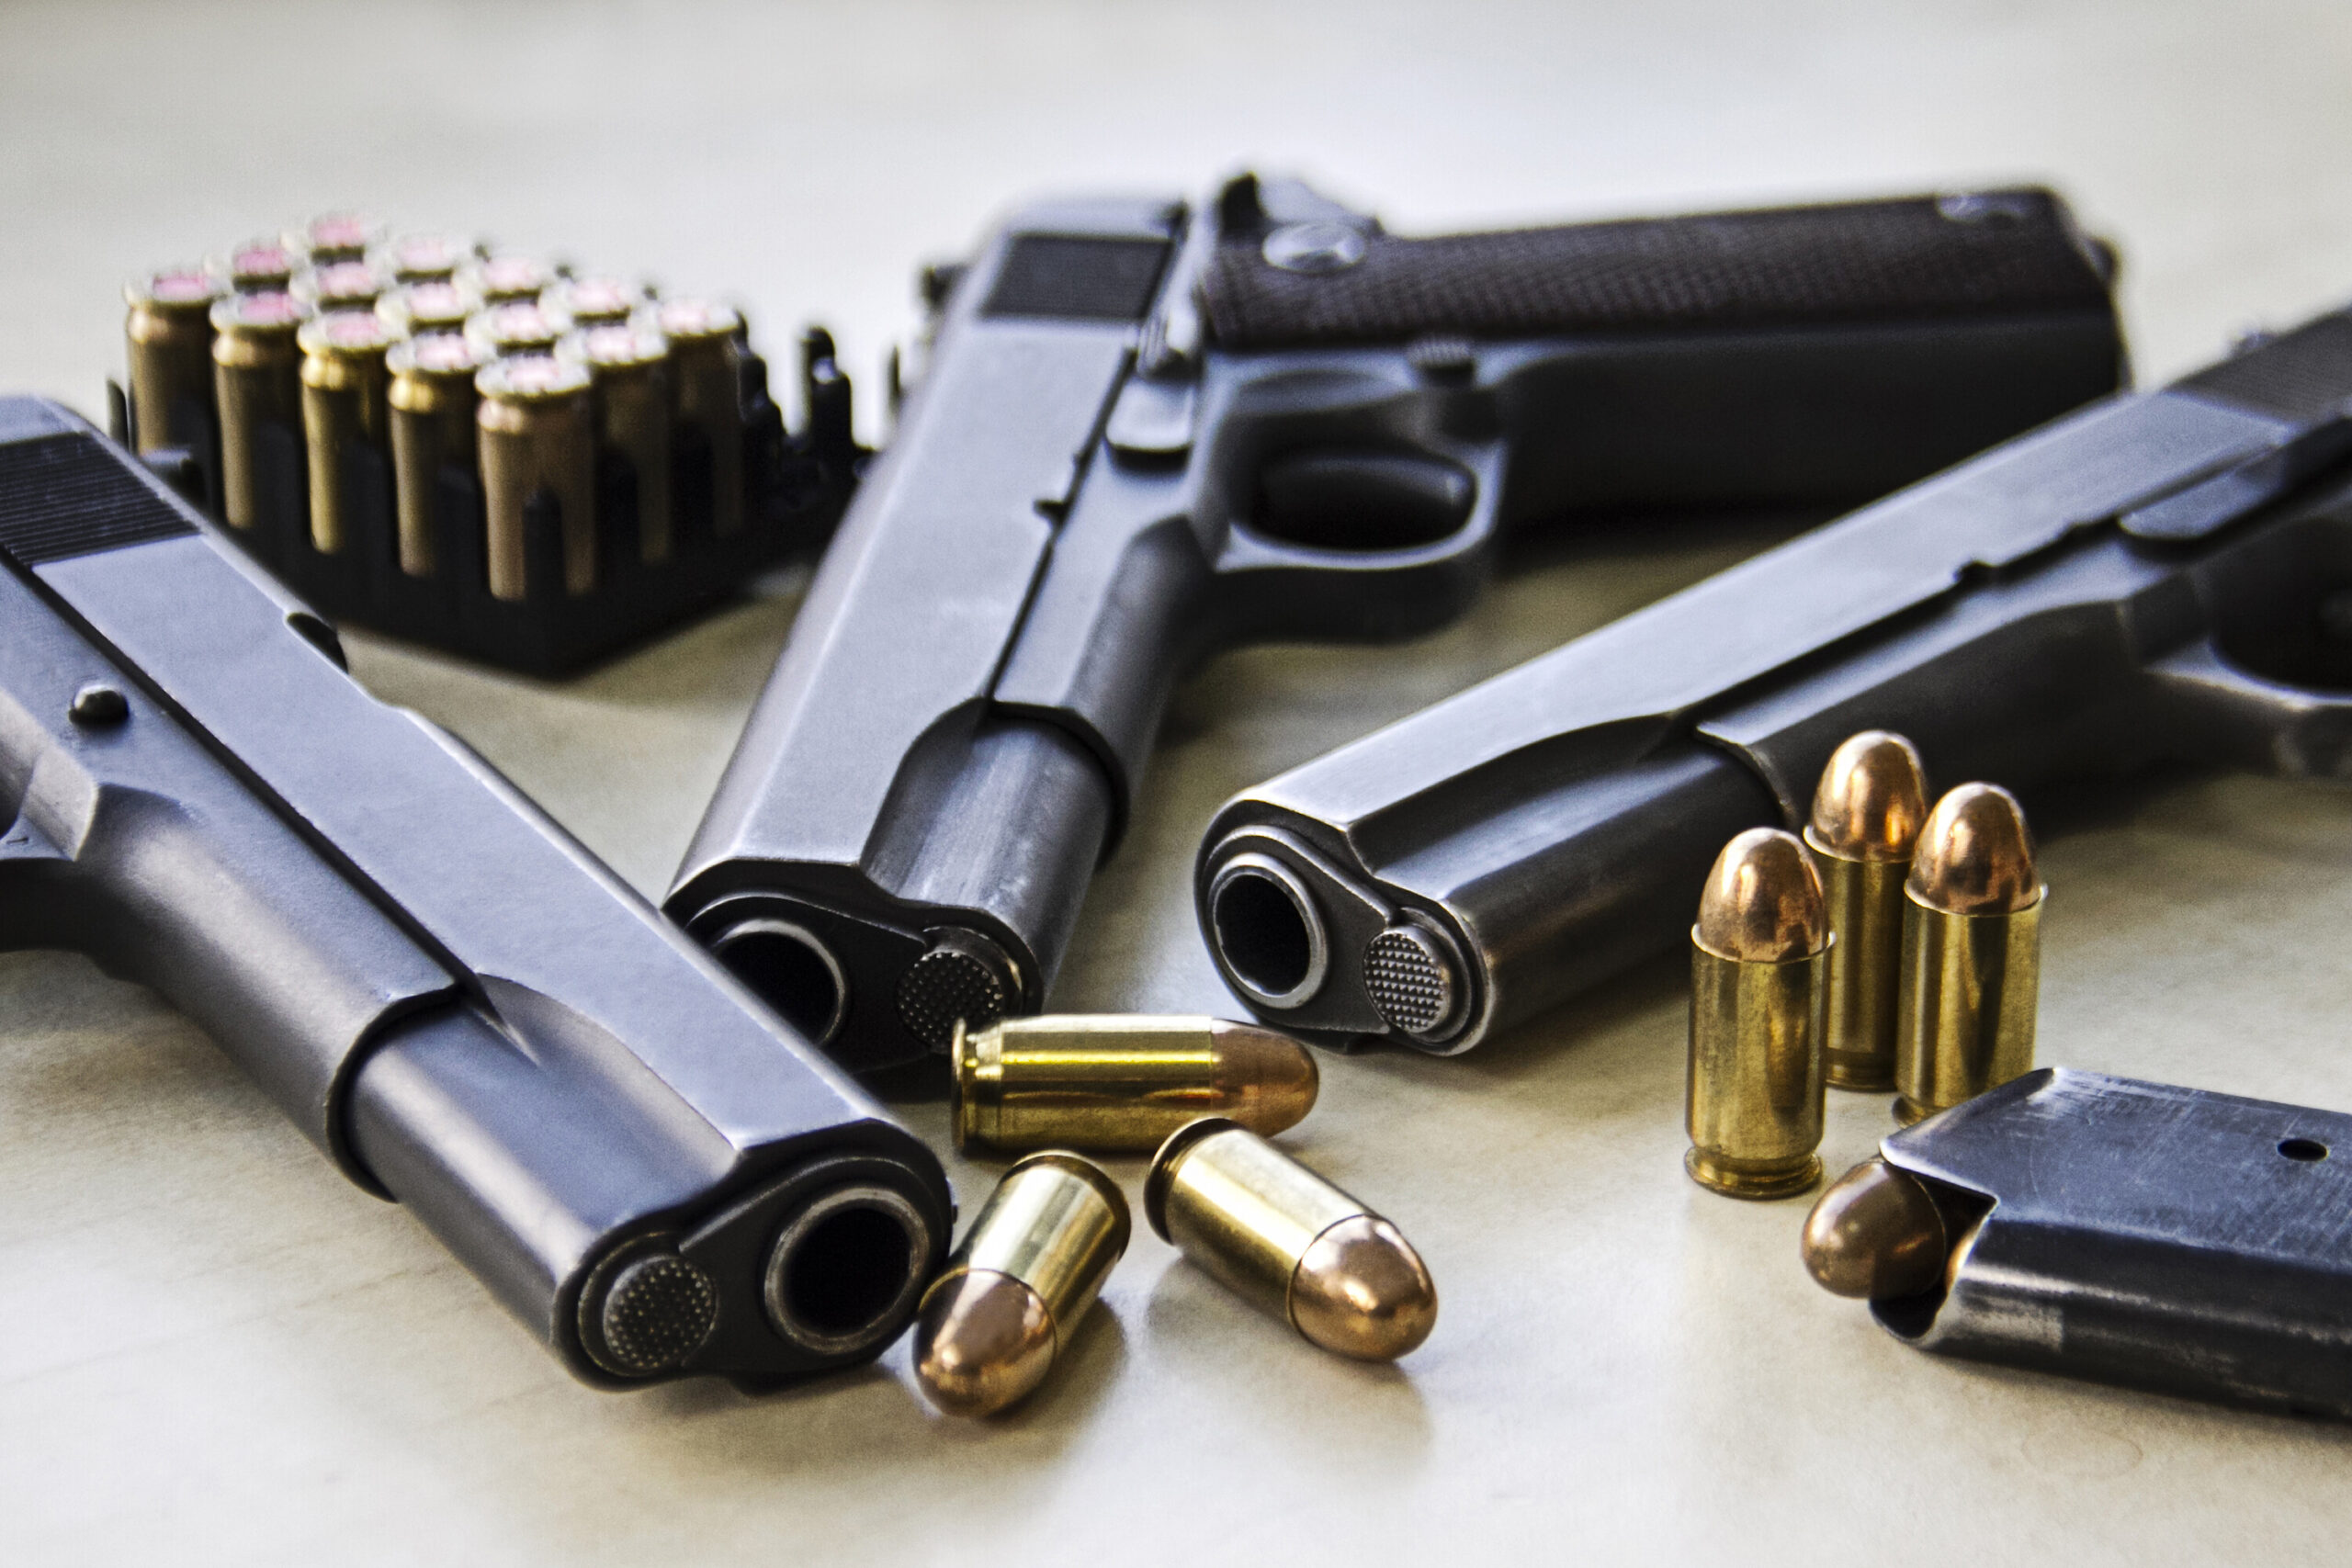 The best criminal defense lawyers in York, PA are here to assist with your gun charges.